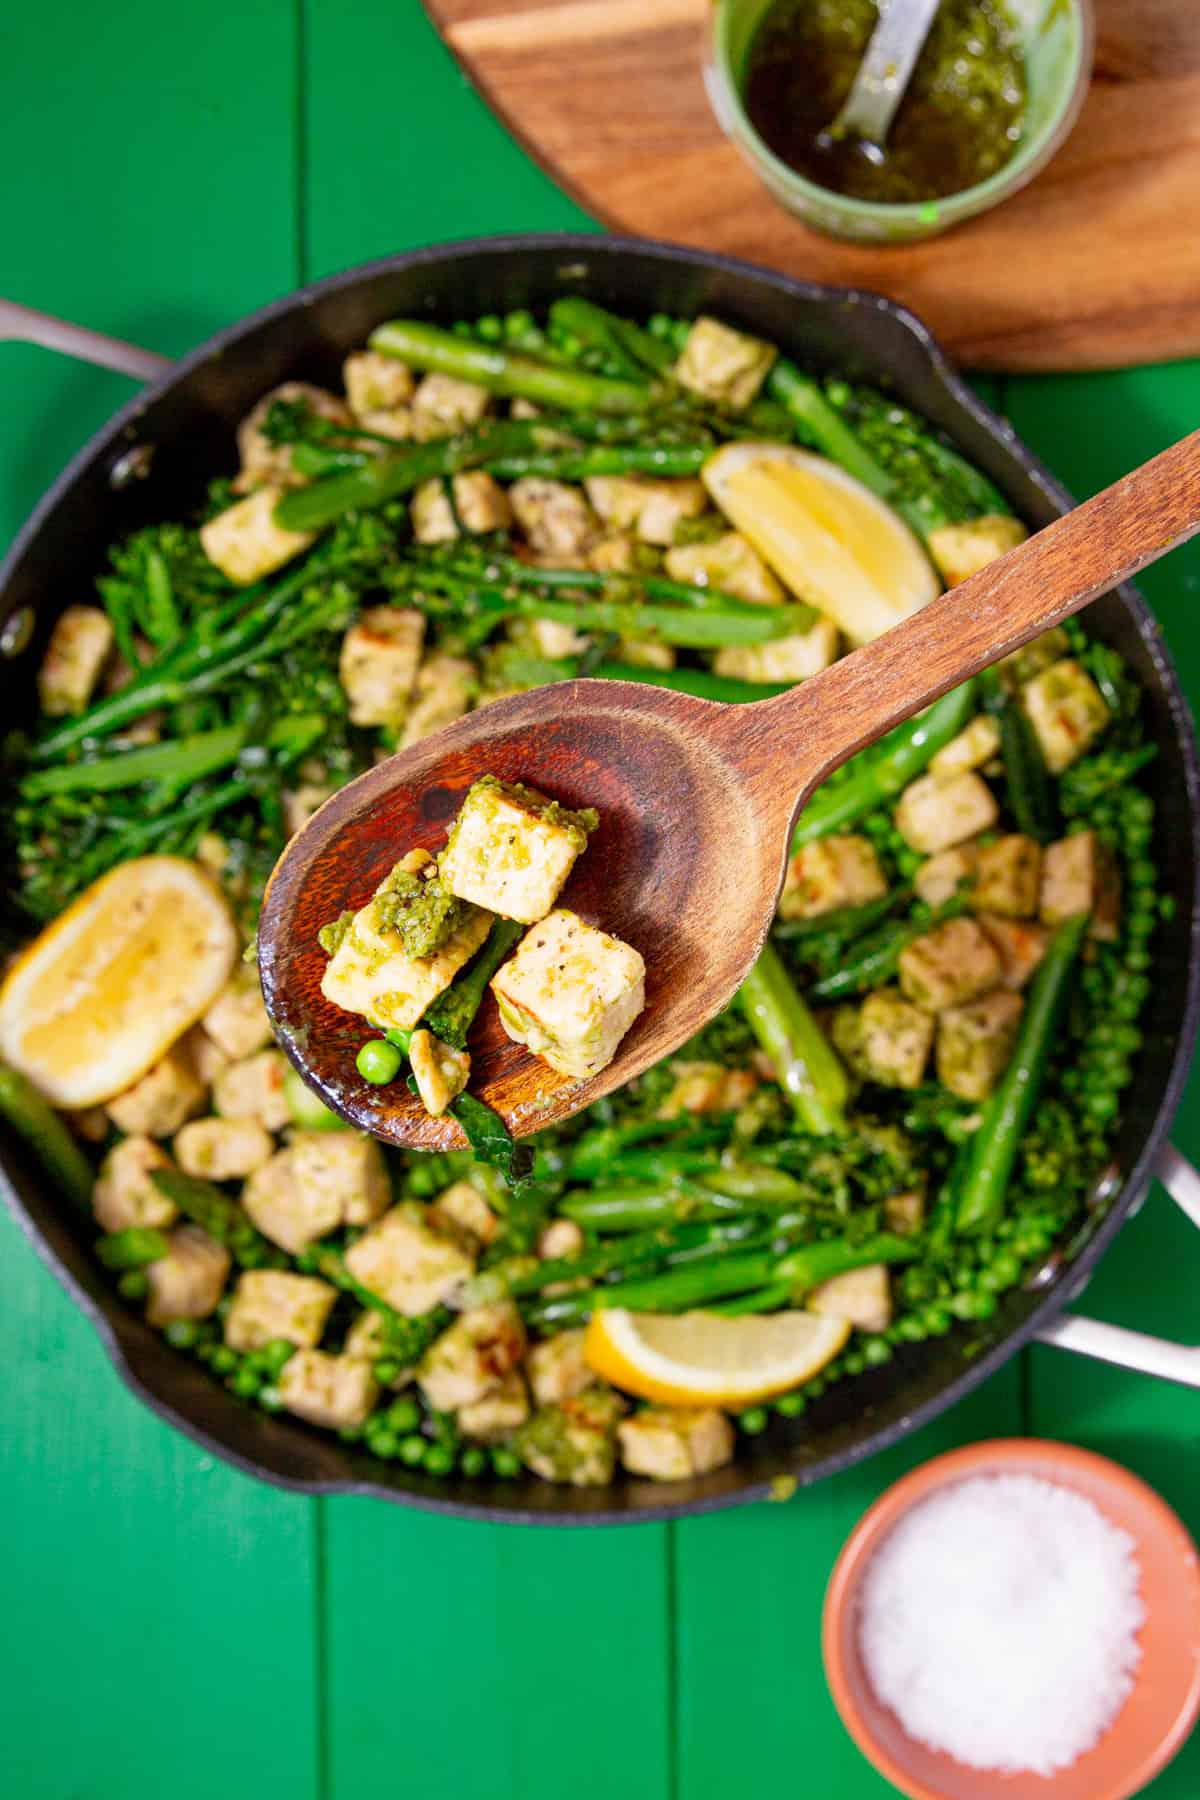 A large pan with a few Quorn pieces on a wooden spoon held up over the pan with broccoli, asparagus and peas with some lemon wedges and a green sauce next to a small bowl of salt.